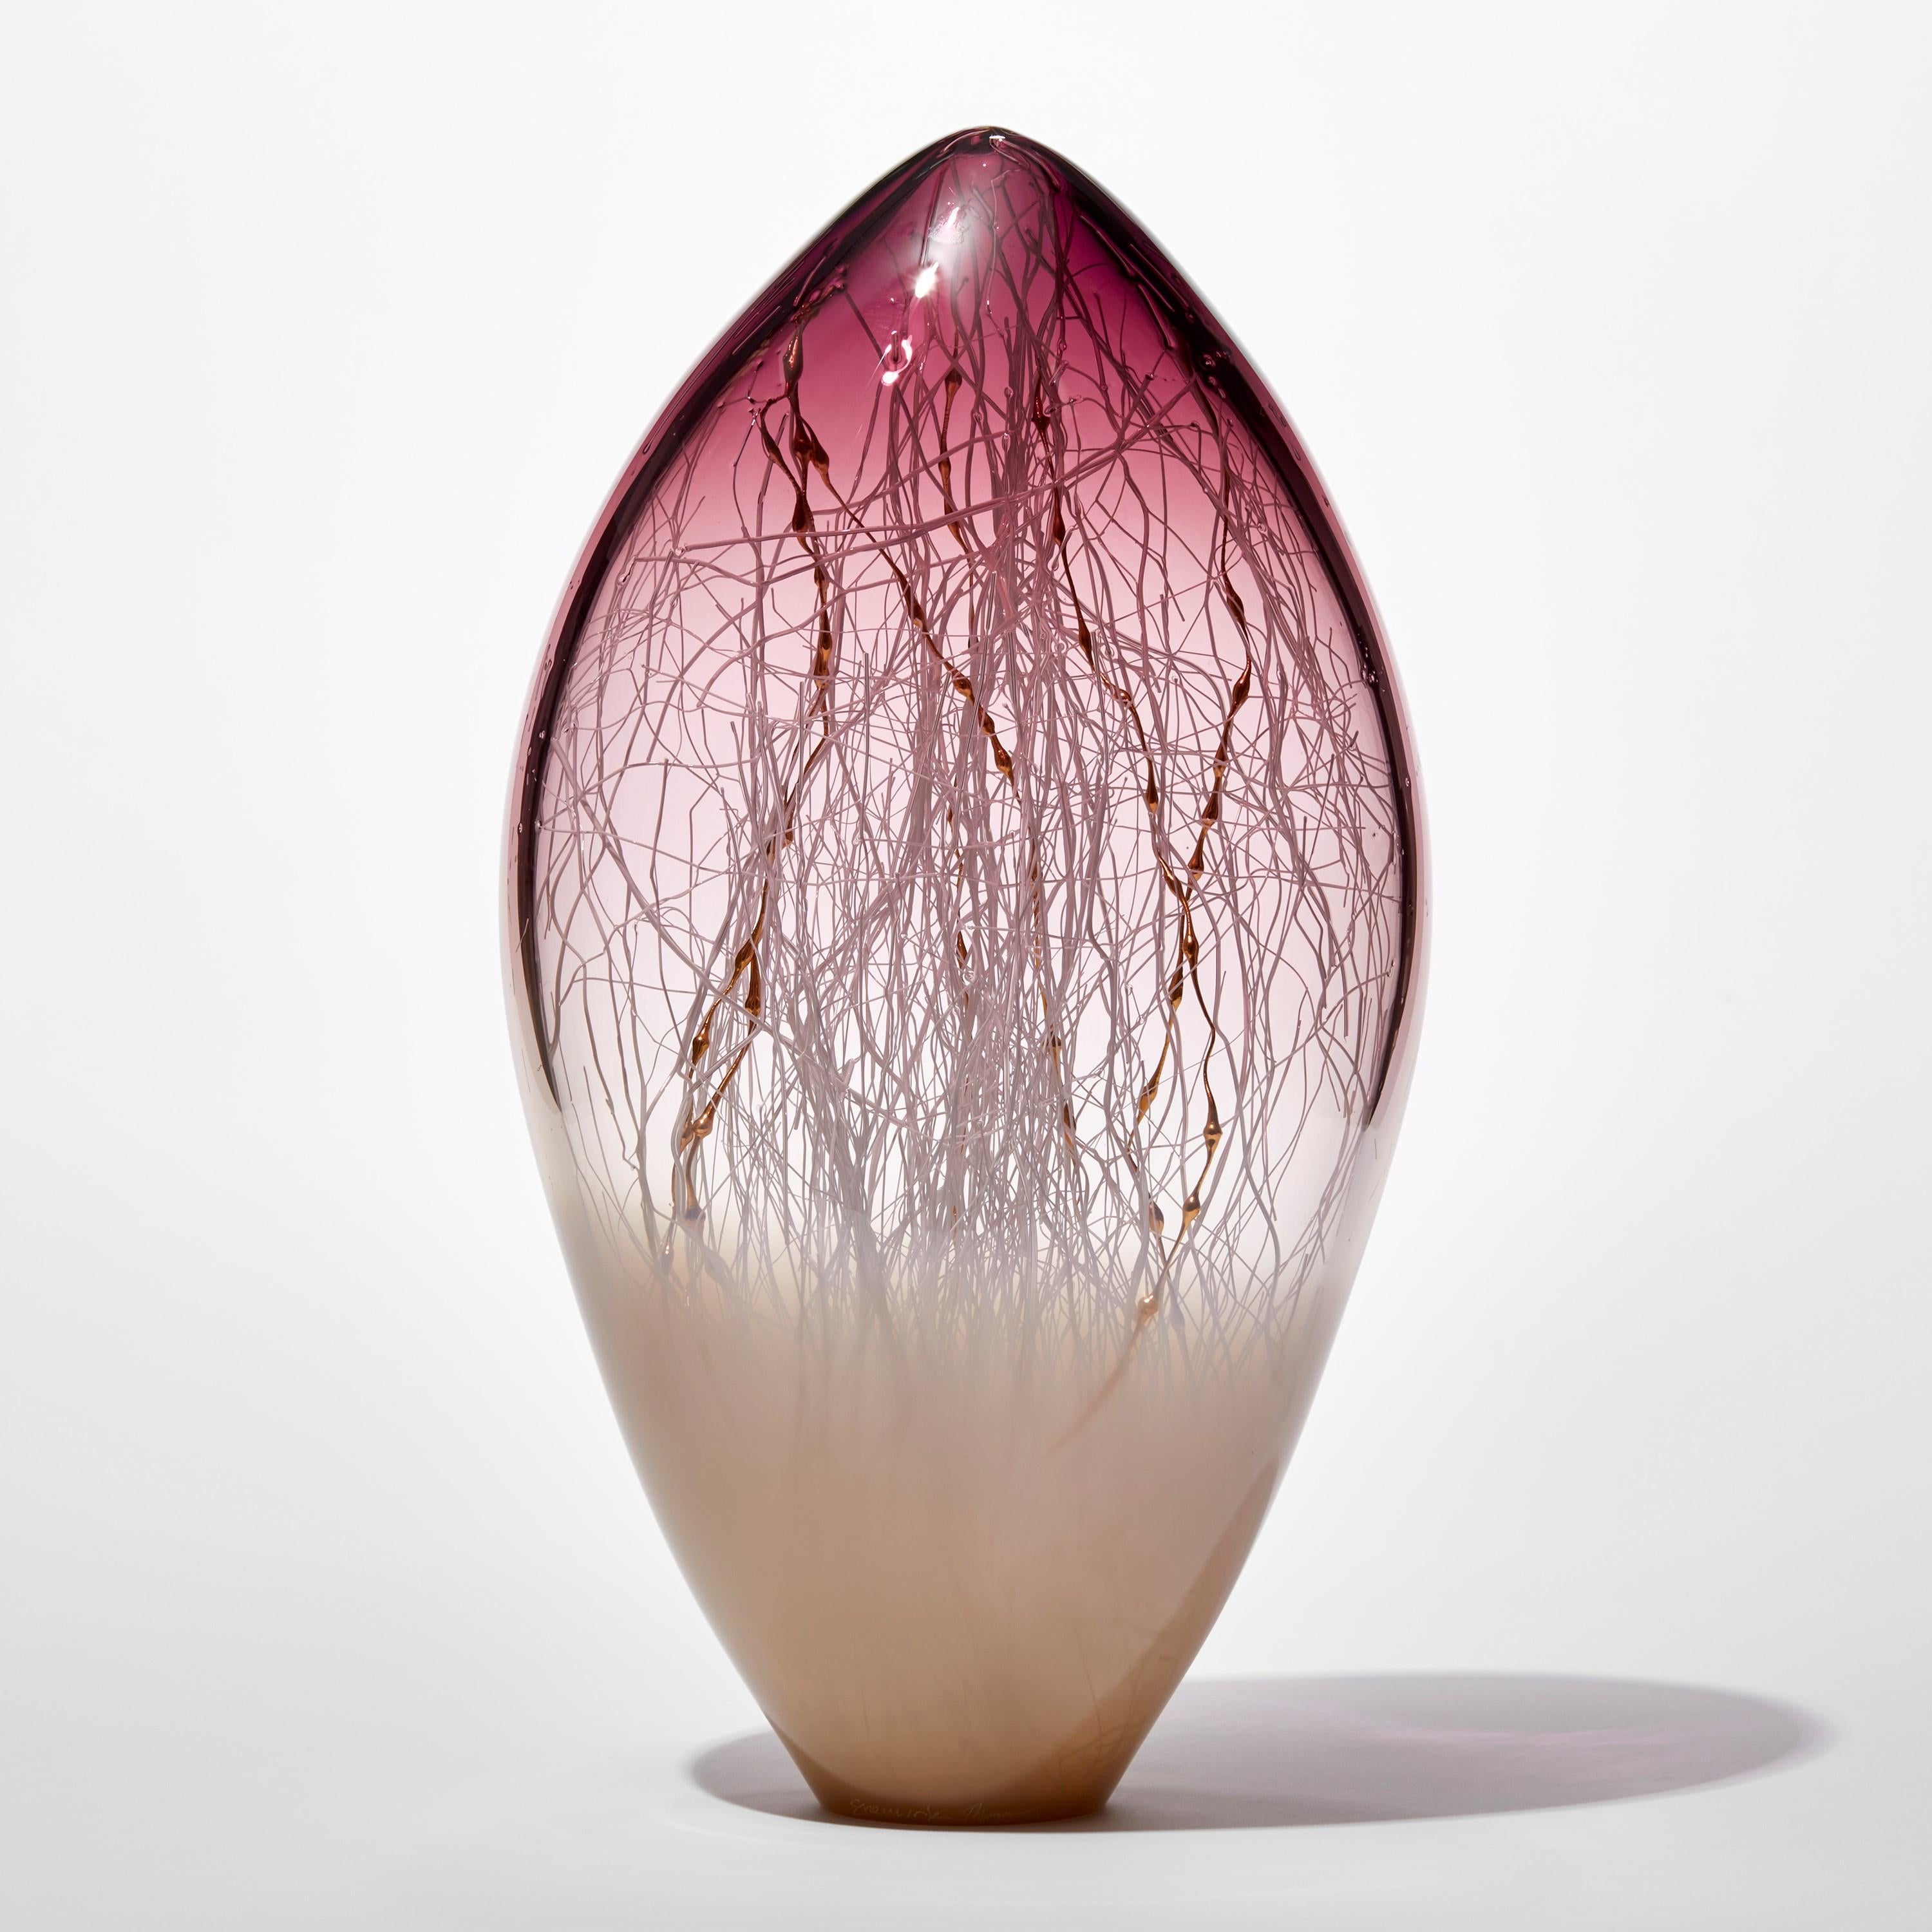 'Elixir in Weimaraner and Amethyst Red' is a unique handblown and sculpted glass artwork by the Danish and British artists, Hanne Enemark & Louis Thompson.

The outer glass form contains a multitude of fine white canes of glass, some of which have